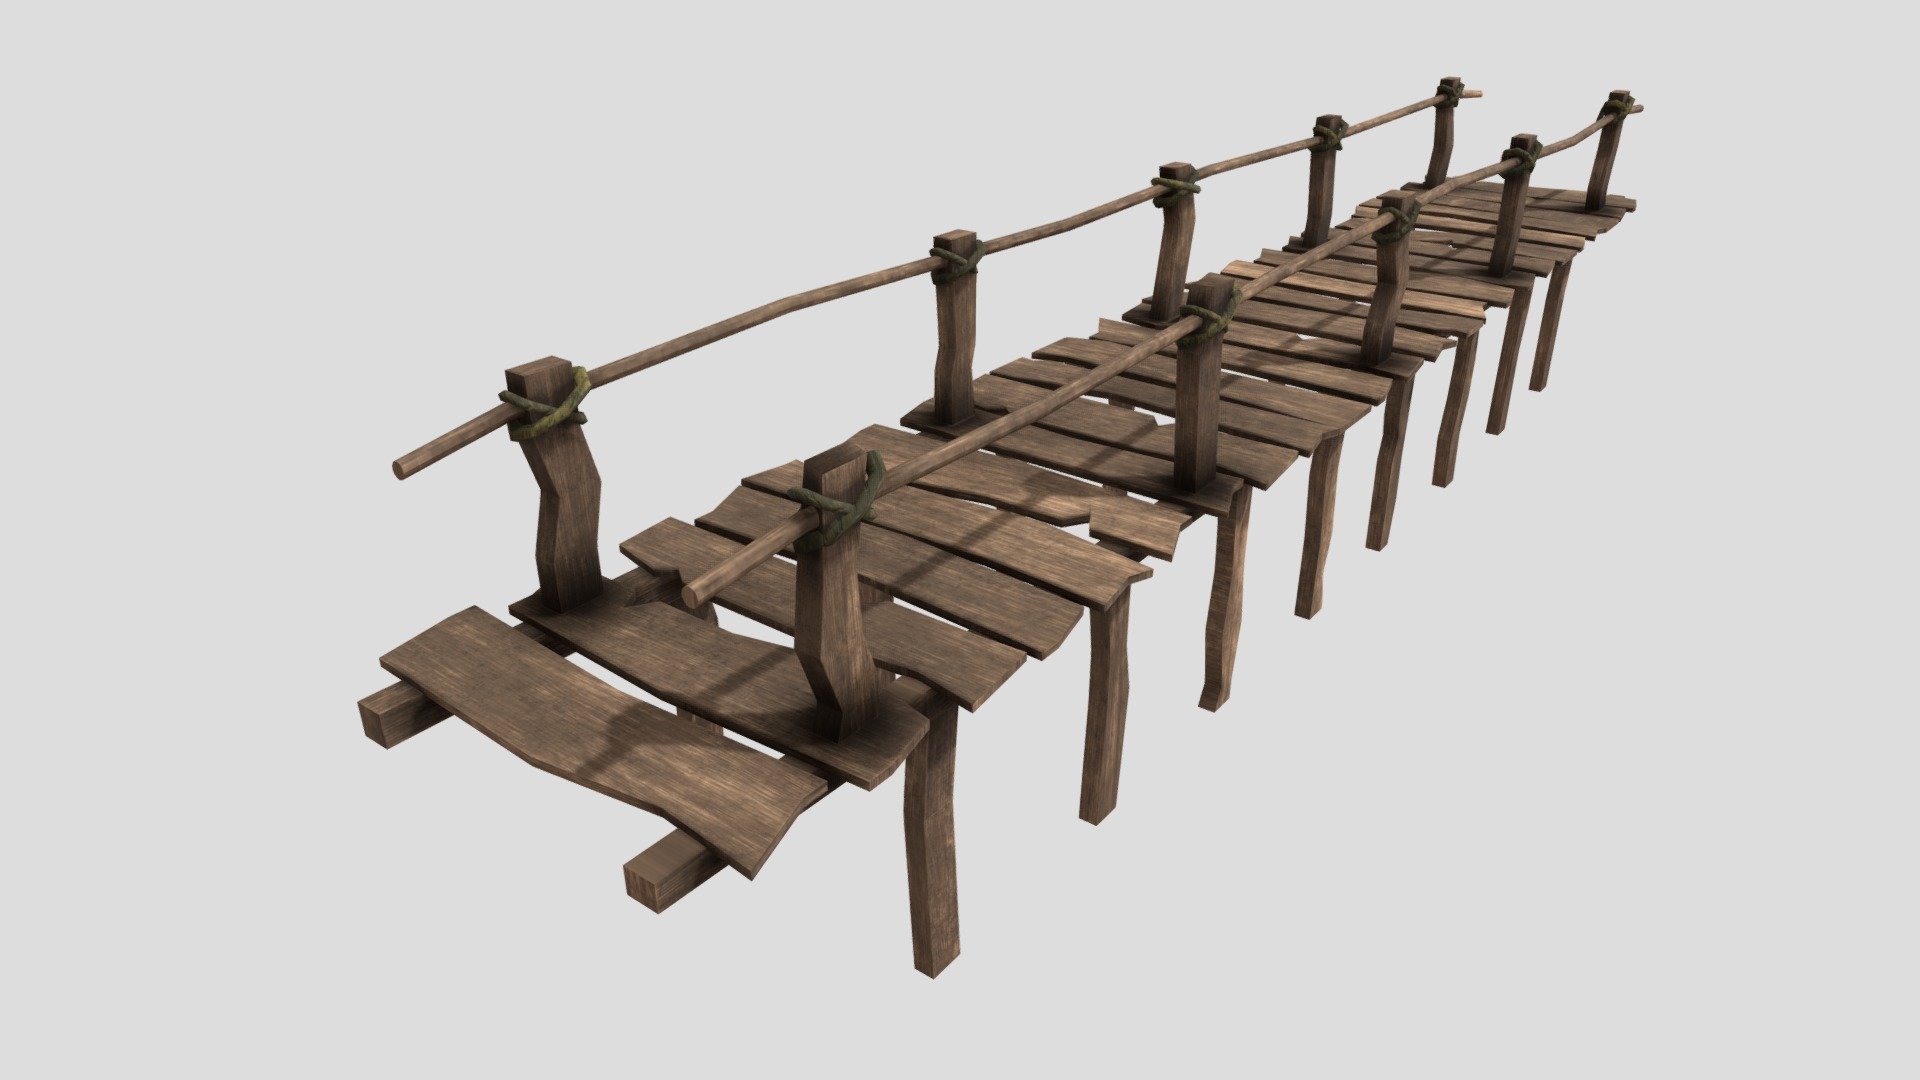 Features:

Bridge wooden
Low poly
Game ready
Optimized
Grouped and nomed parts
All formats tested and working
Textures included and material aplied
Easy to modify
substance painter - Wood Bridge - Buy Royalty Free 3D model by wagnerlima07 3d model